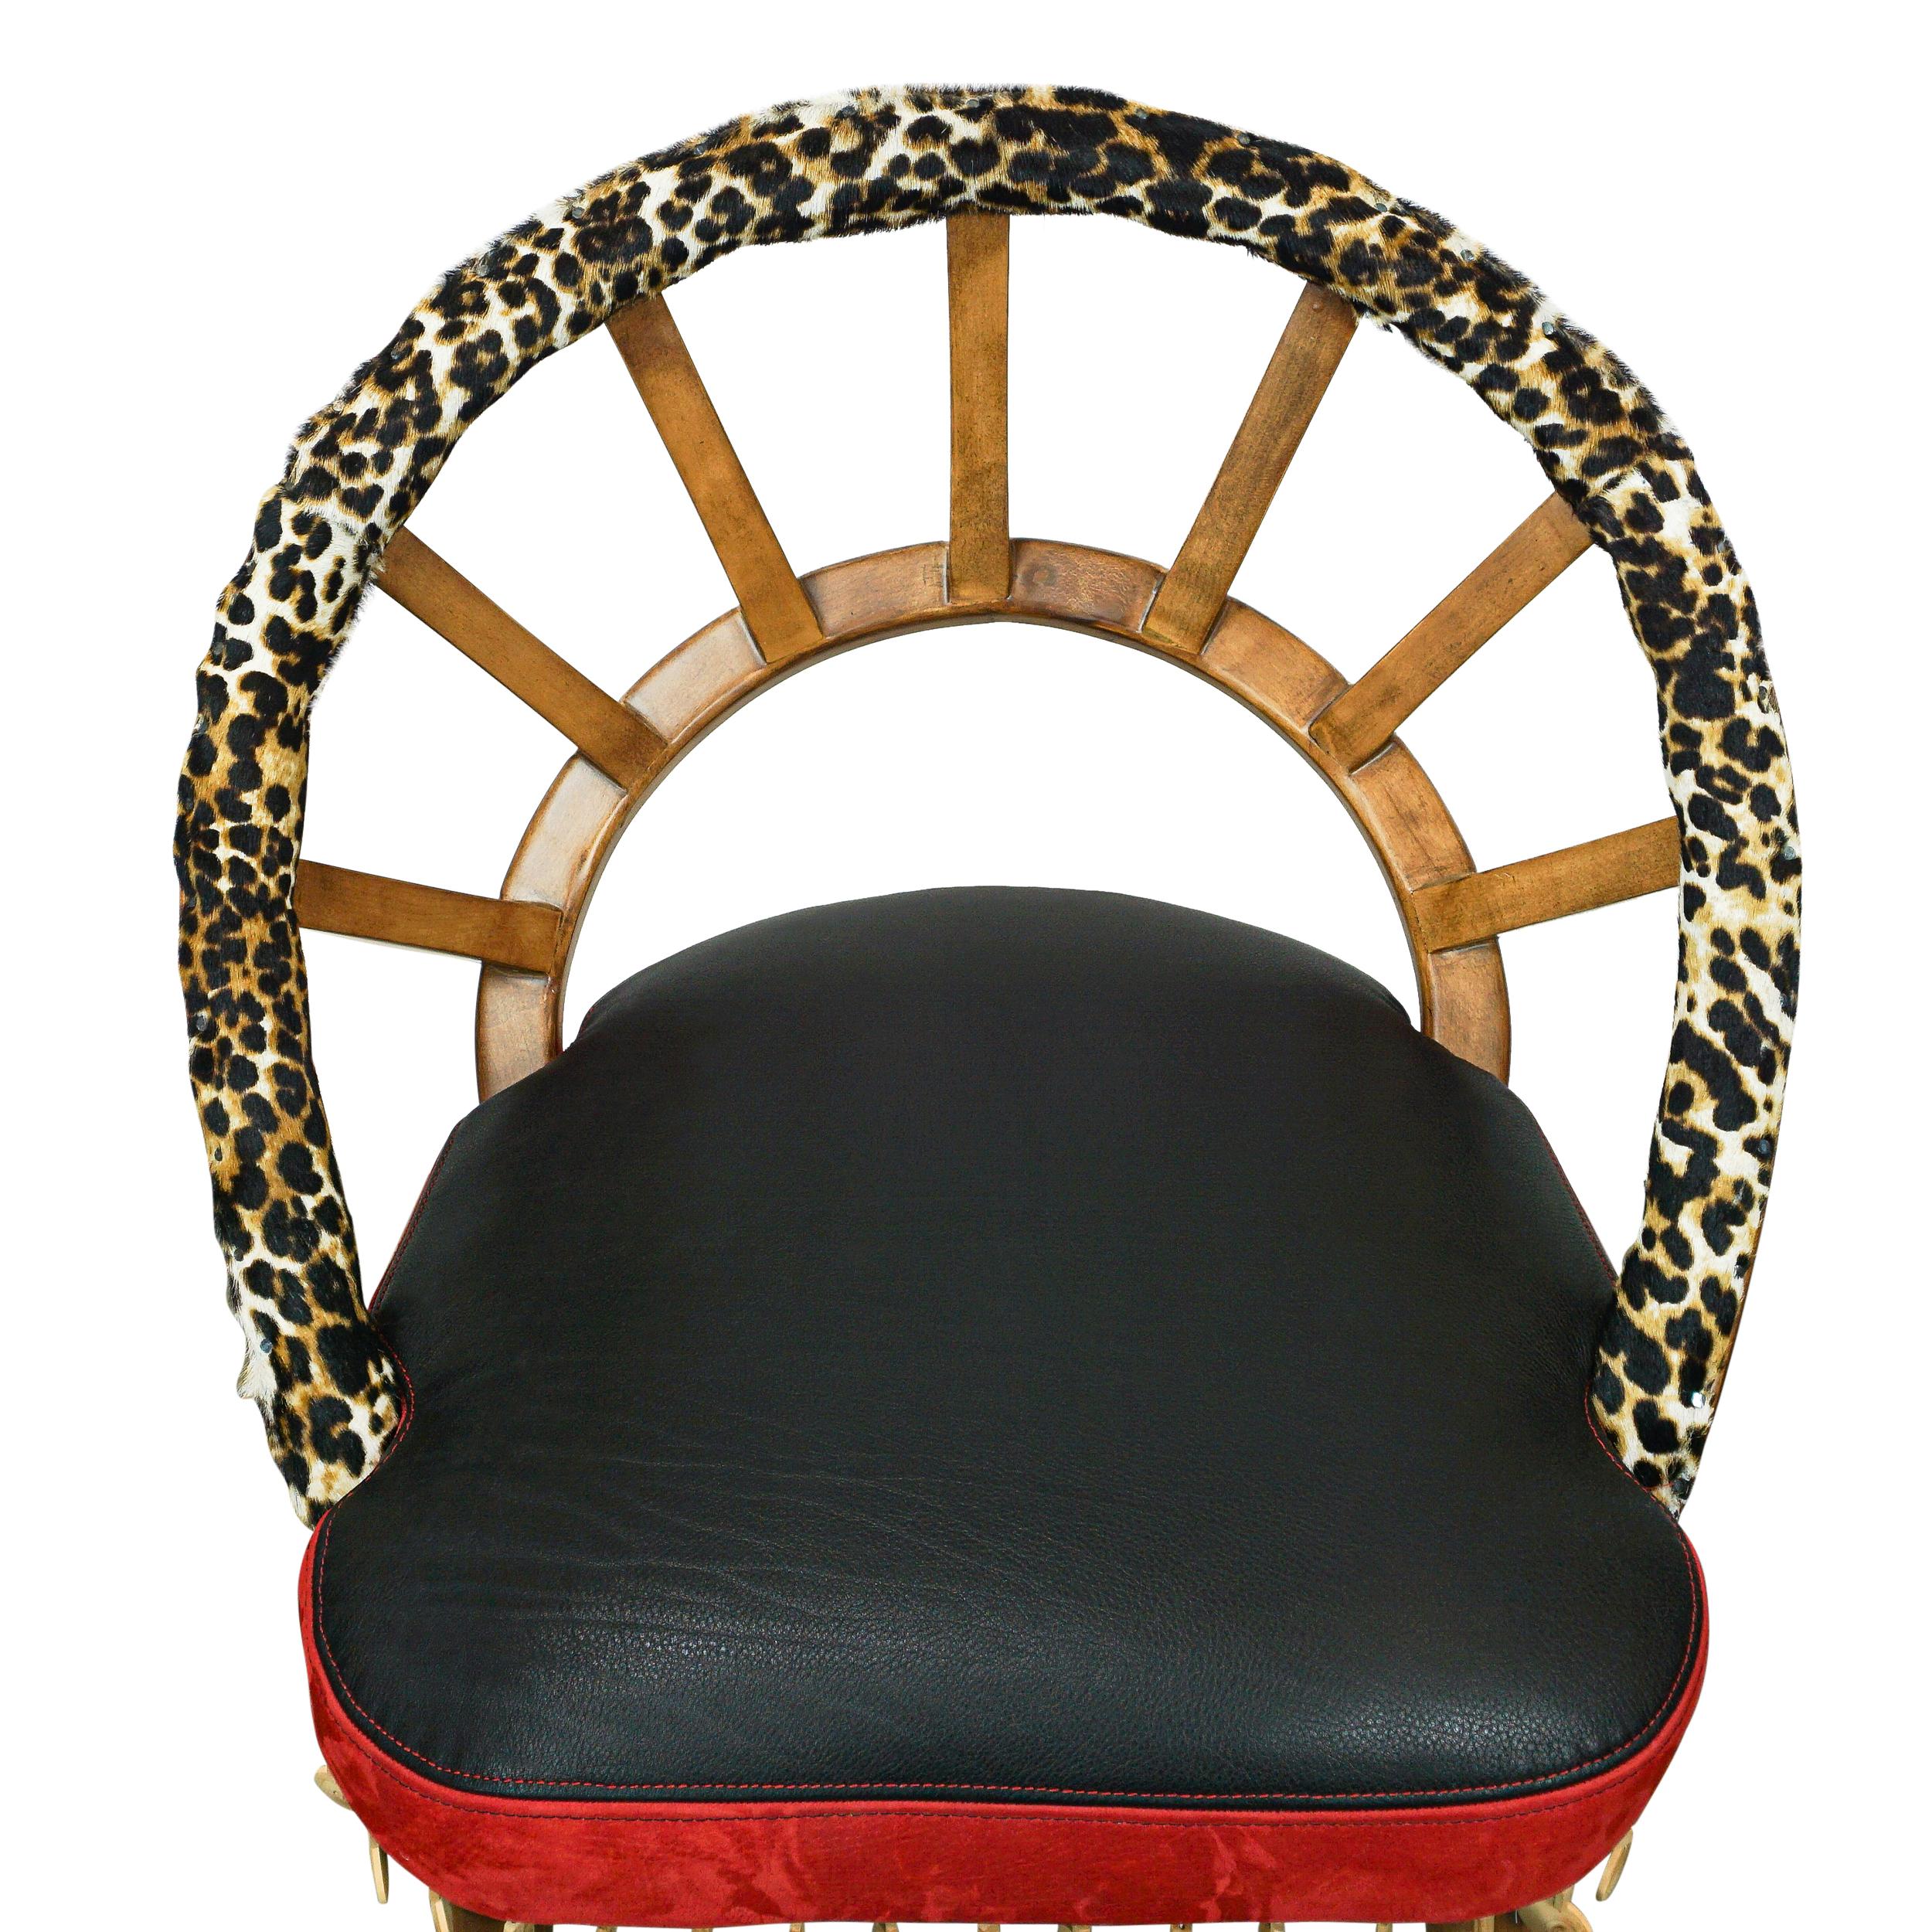 Ribbed Wood Chair with Cheetah Hair on Hide, Red + Black Leather and Wood Bead For Sale 3